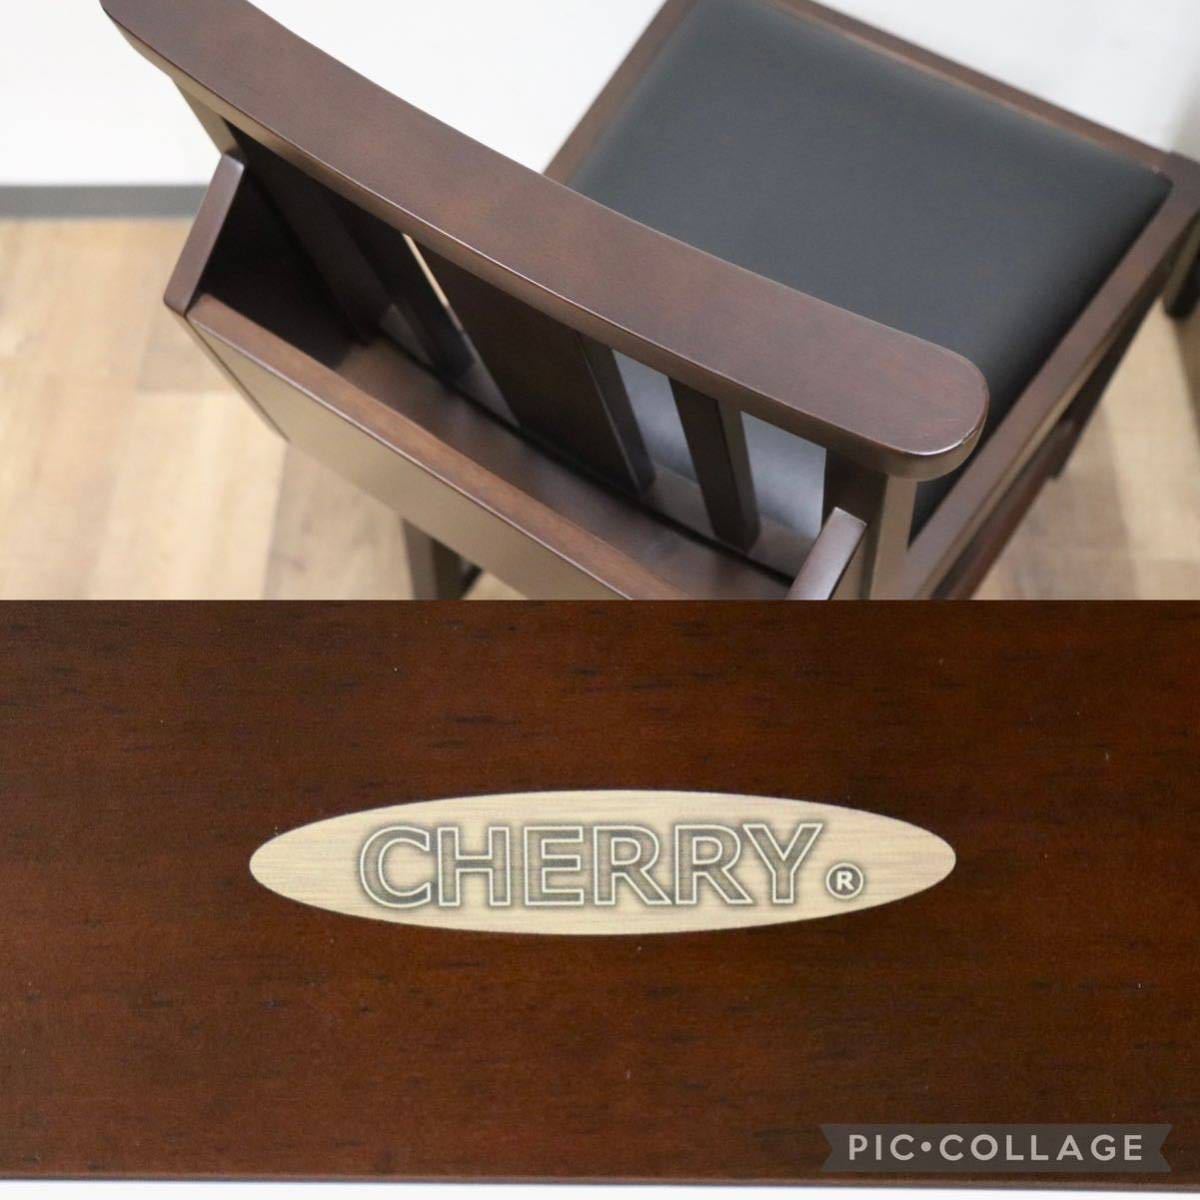 GMGN342A○CHERRY FURNITURE / 桜屋工業 ダイニングチェア アームレスチェア マガジンラック 合皮 ダークブラウン 2脚セット 展示未使用品